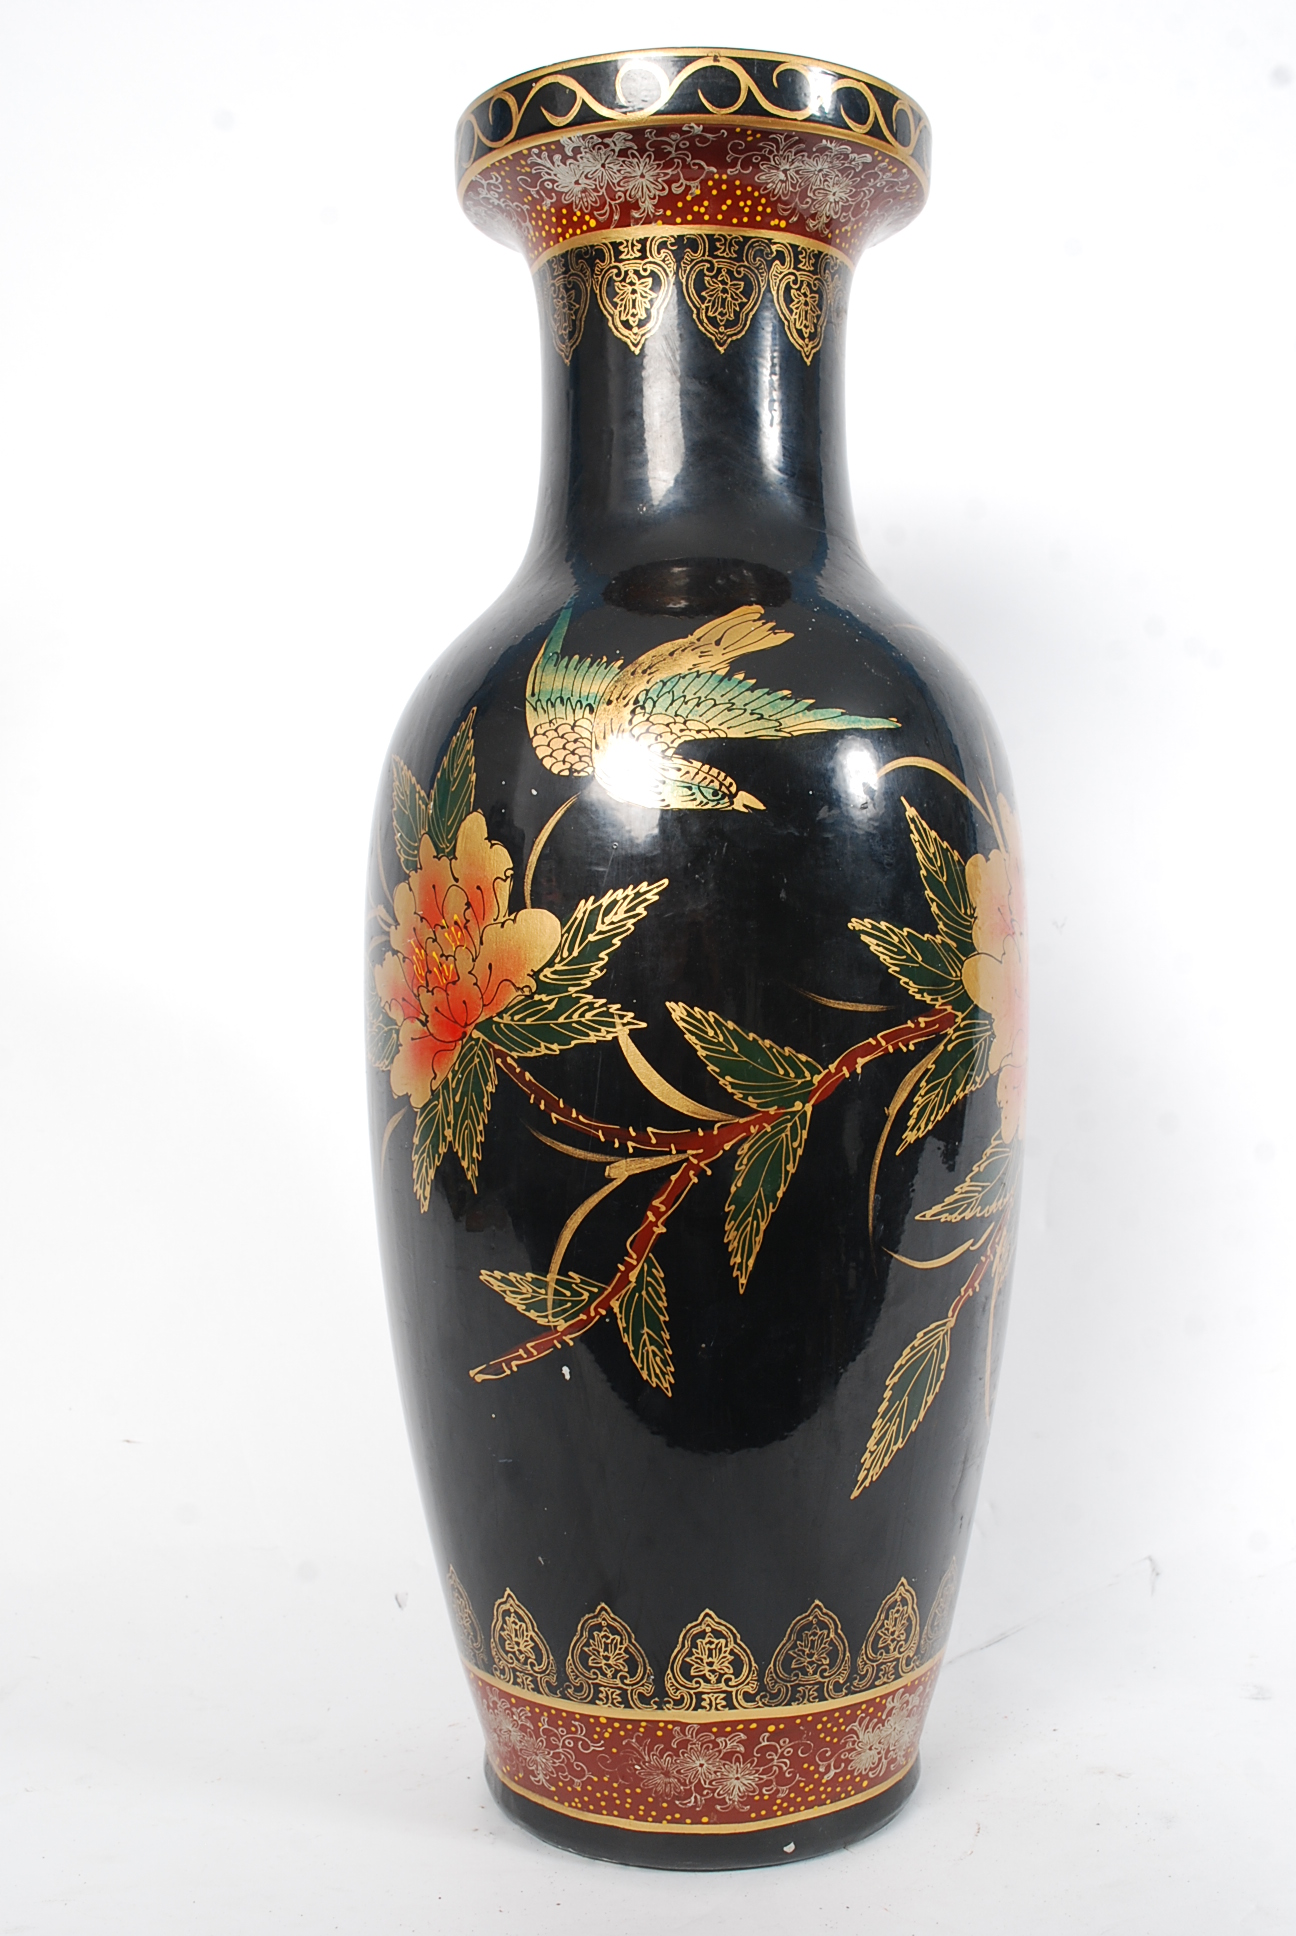 A large floor standing Chinese oriental vase depicting birds of paradise and floral scenes.